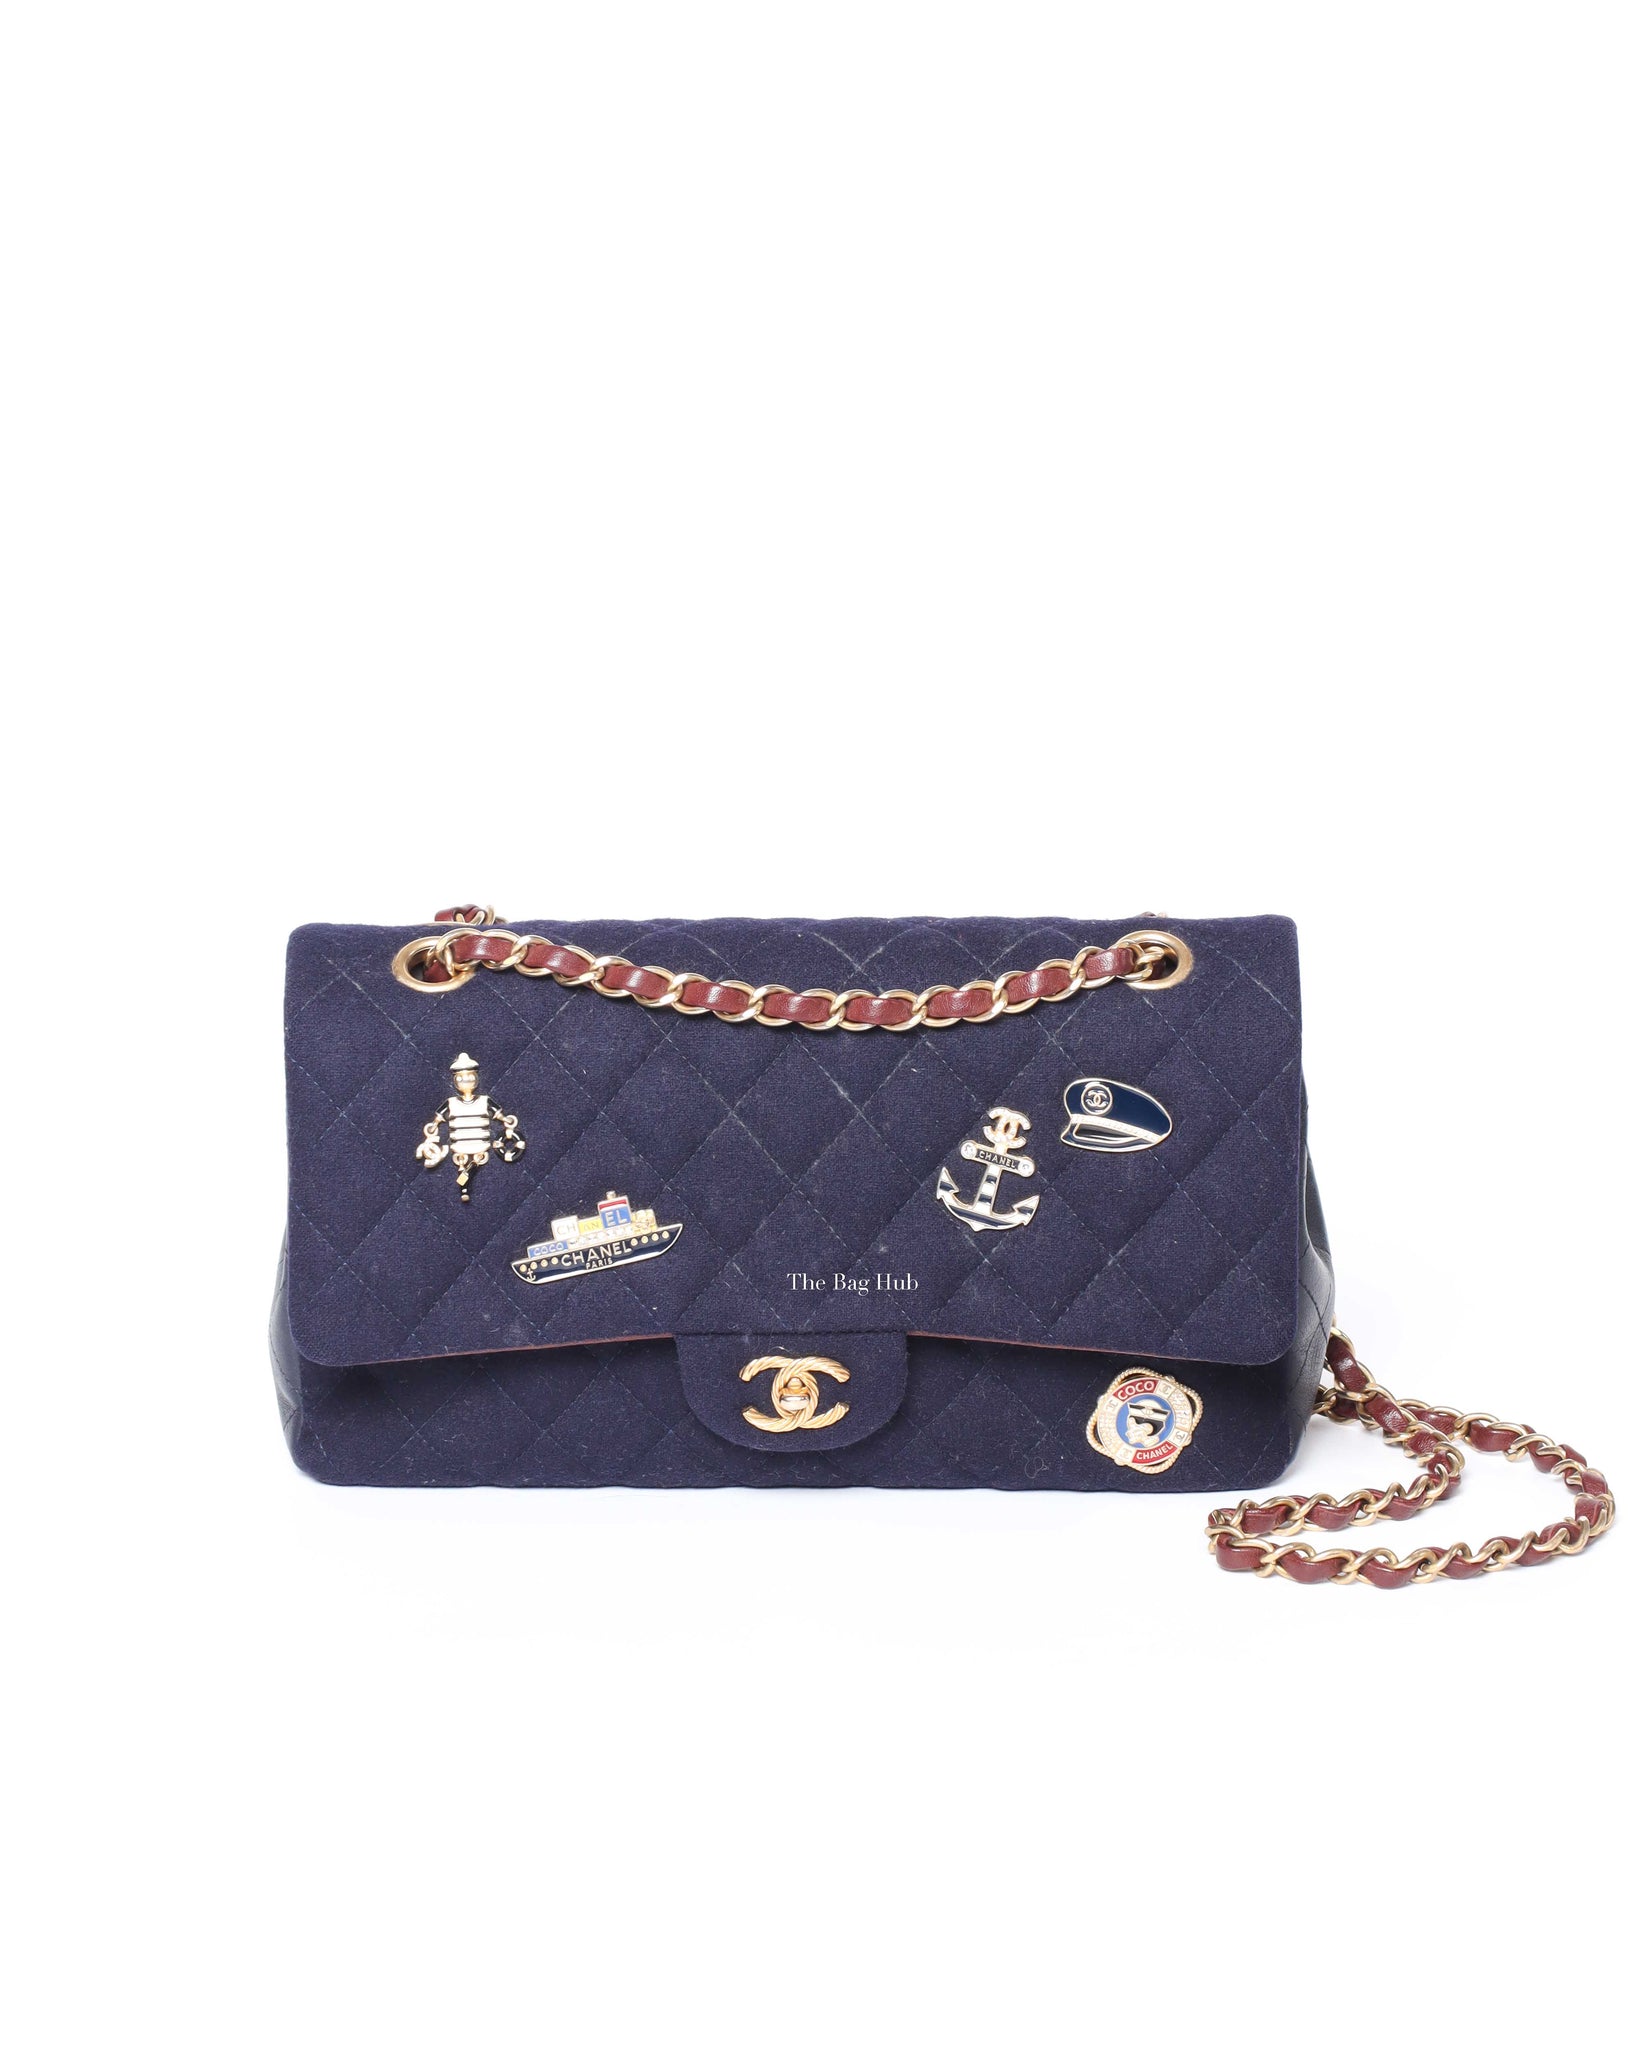 Chanel Navy Blue Wool Paris-Hamburg Charms Classic Double Flap Bag GHW, Designer Brand, Authentic Chanel